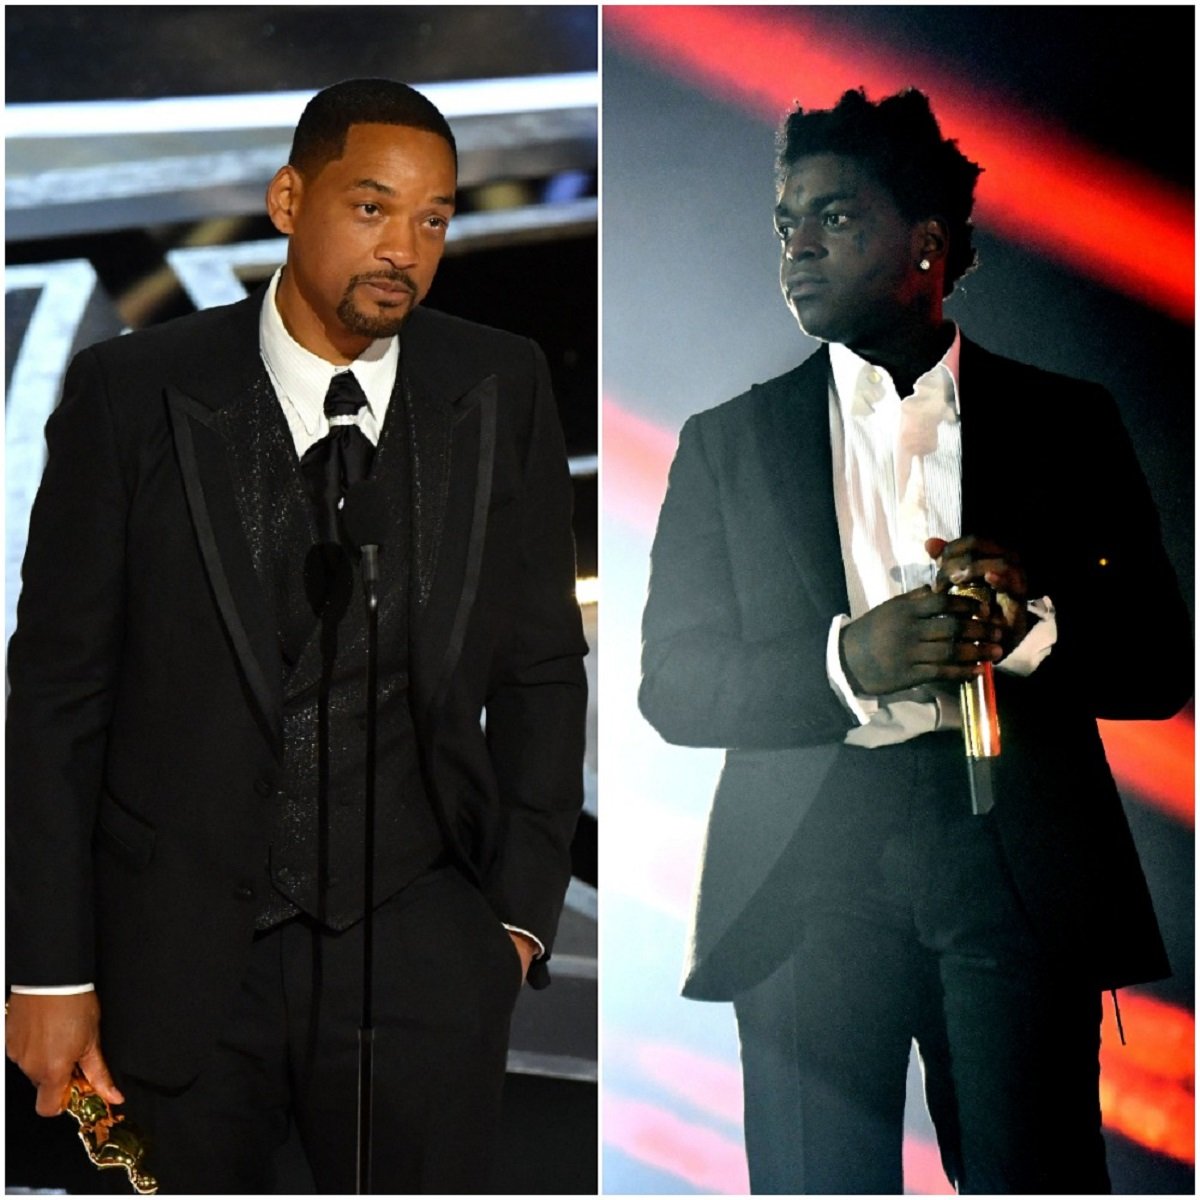  (L): Will Smith accepts the Oscar for Best Actor in a Leading Role for King Richard, (R): Kodak Black performing on stage in Los Angeles